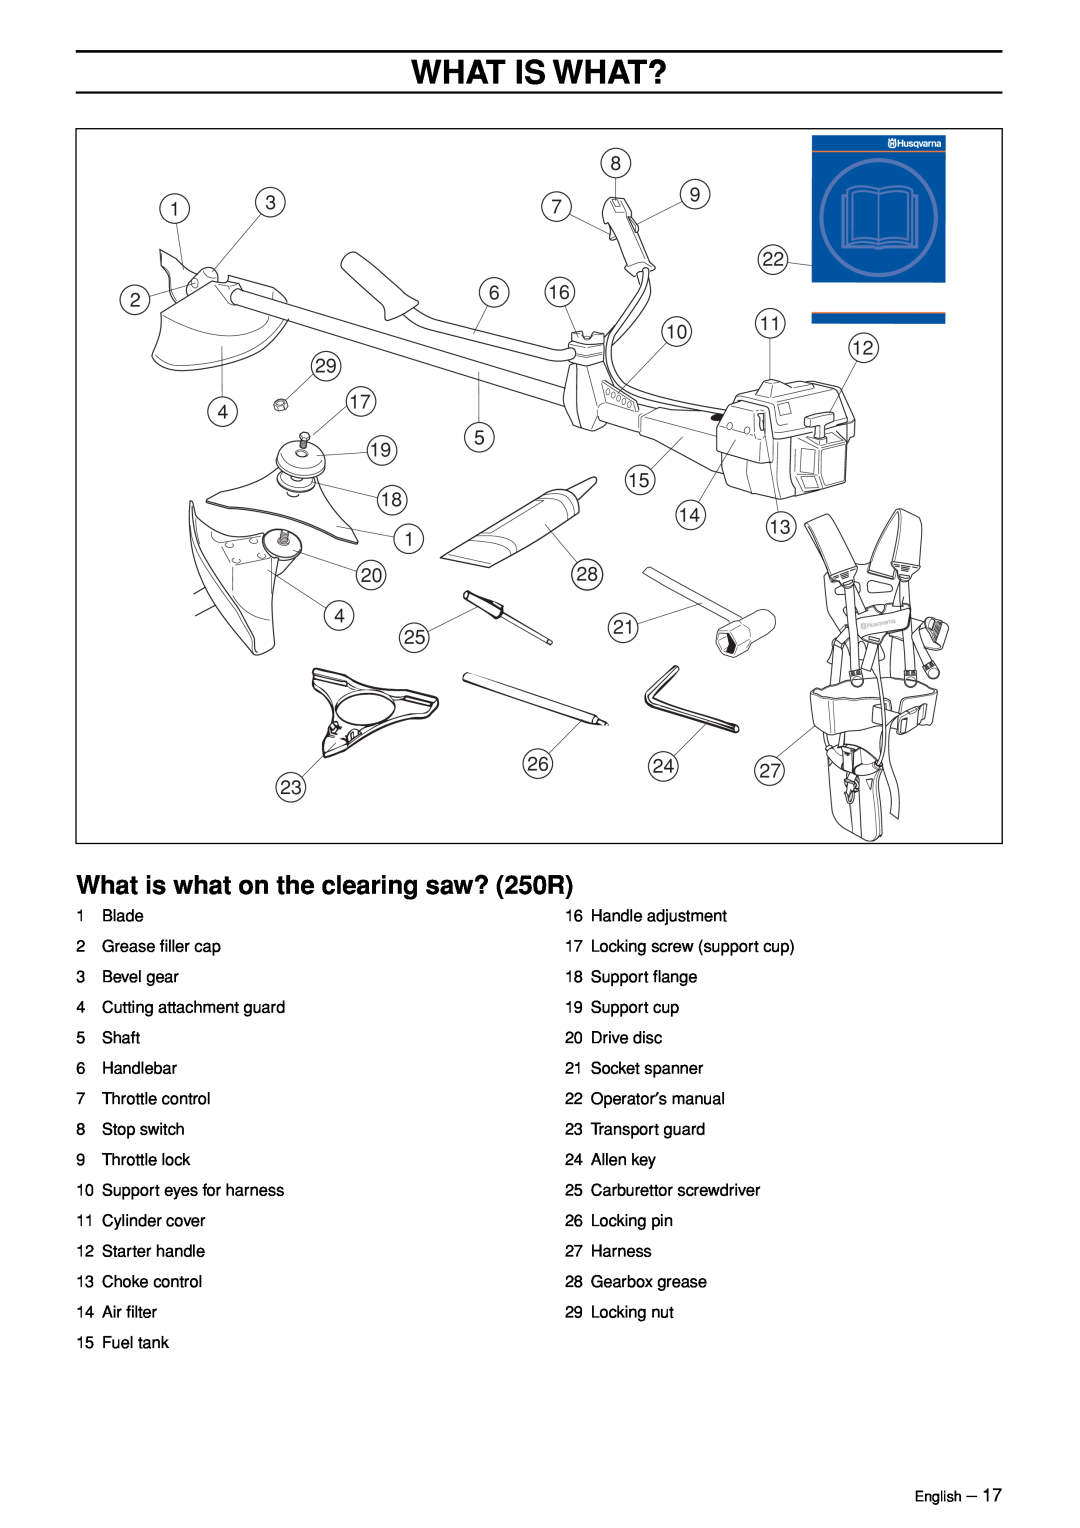 Husqvarna 245RX manual What is what on the clearing saw? 250R, What Is What? 